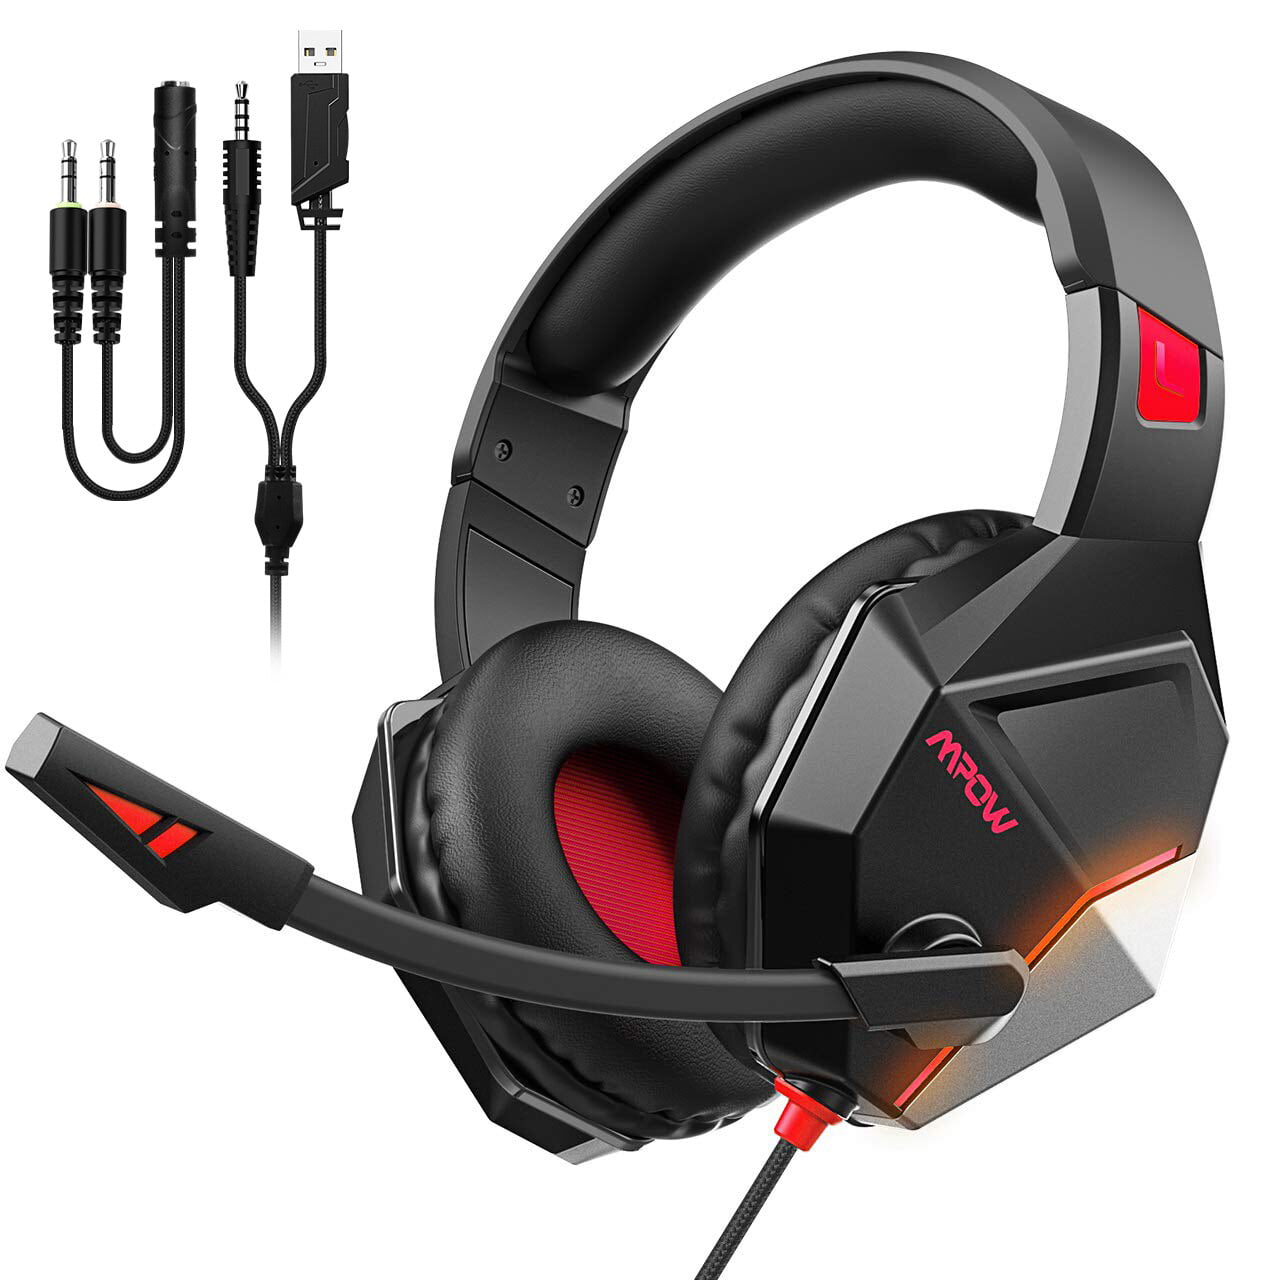 ENVEL Gaming Headset for PS4 with Mic,PC,Xbox One,Laptop 